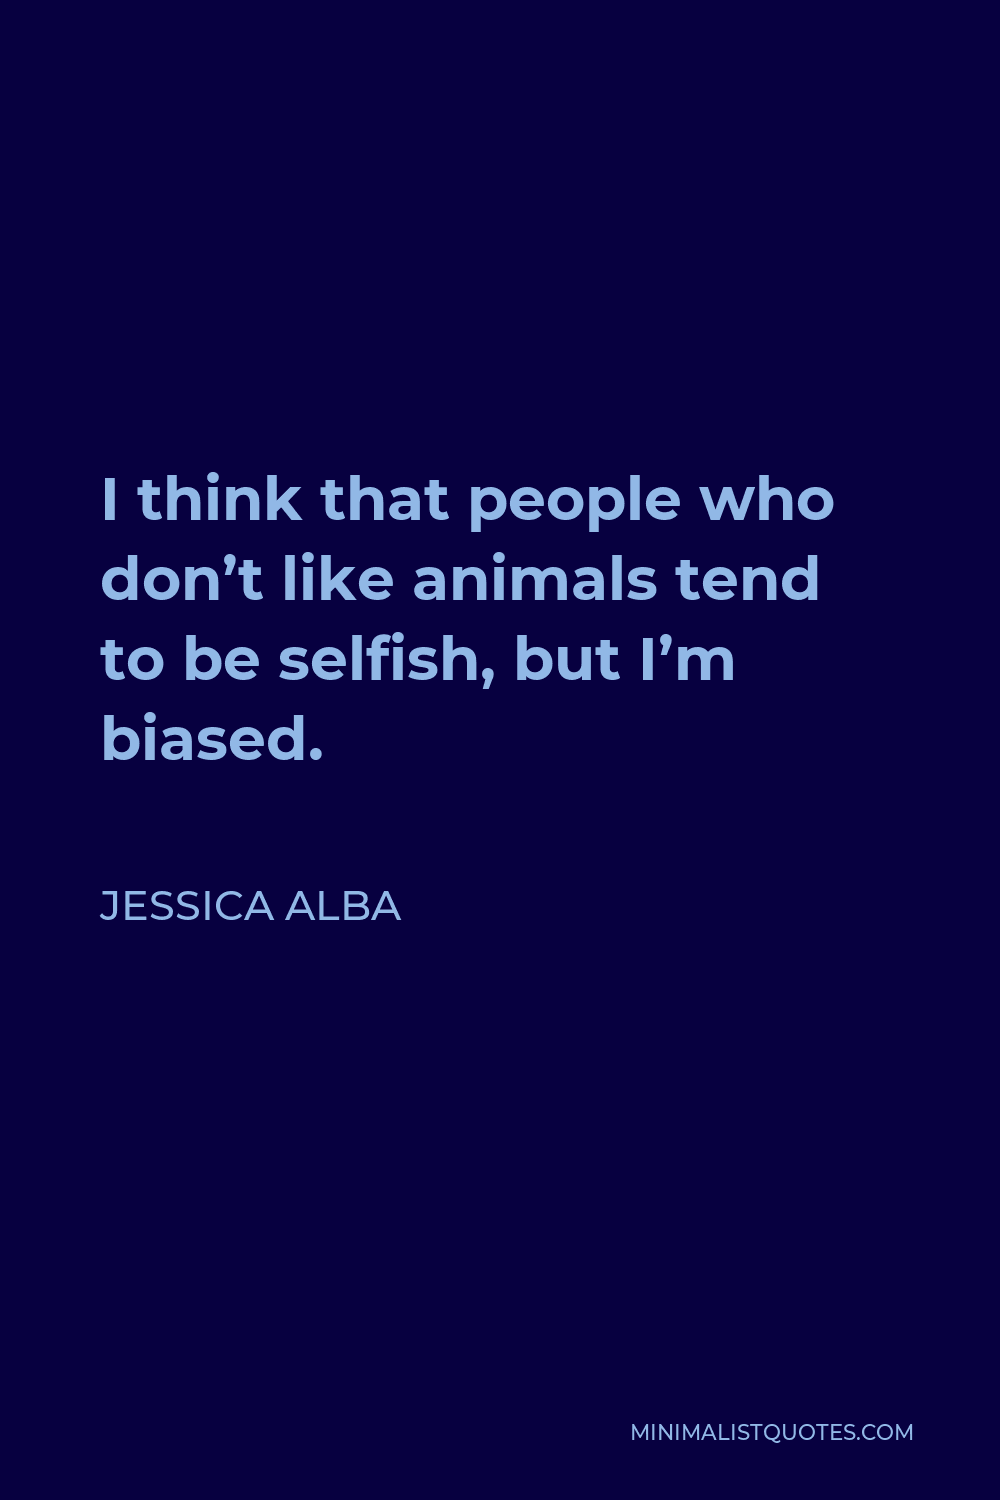 Jessica Alba Quote - I think that people who don’t like animals tend to be selfish, but I’m biased.